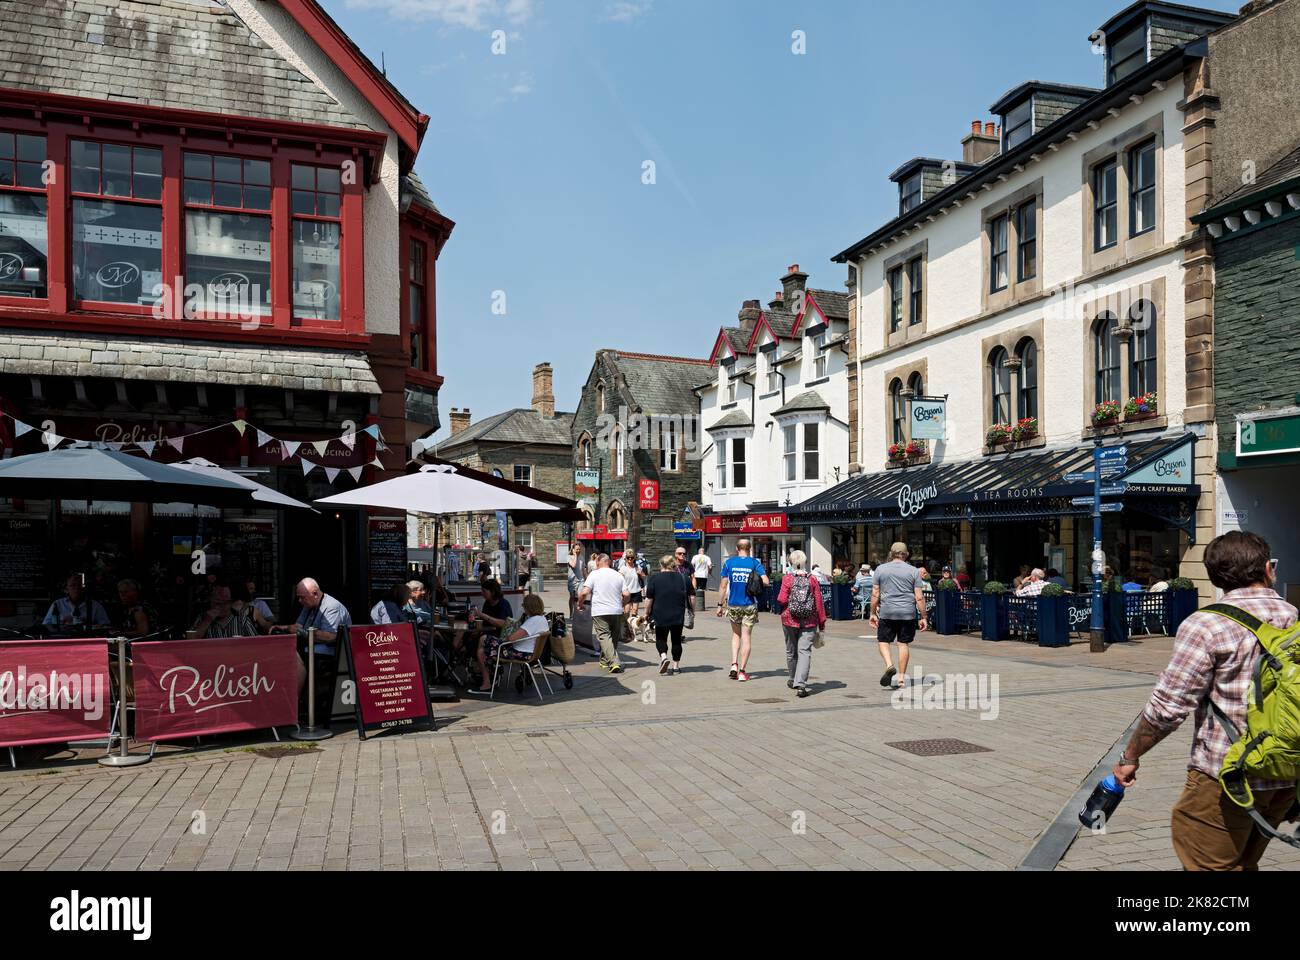 People tourists visitors walkers eating drinking at restaurants cafe and shops in the town centre in summer Main Street Keswick Cumbria England UK Stock Photo